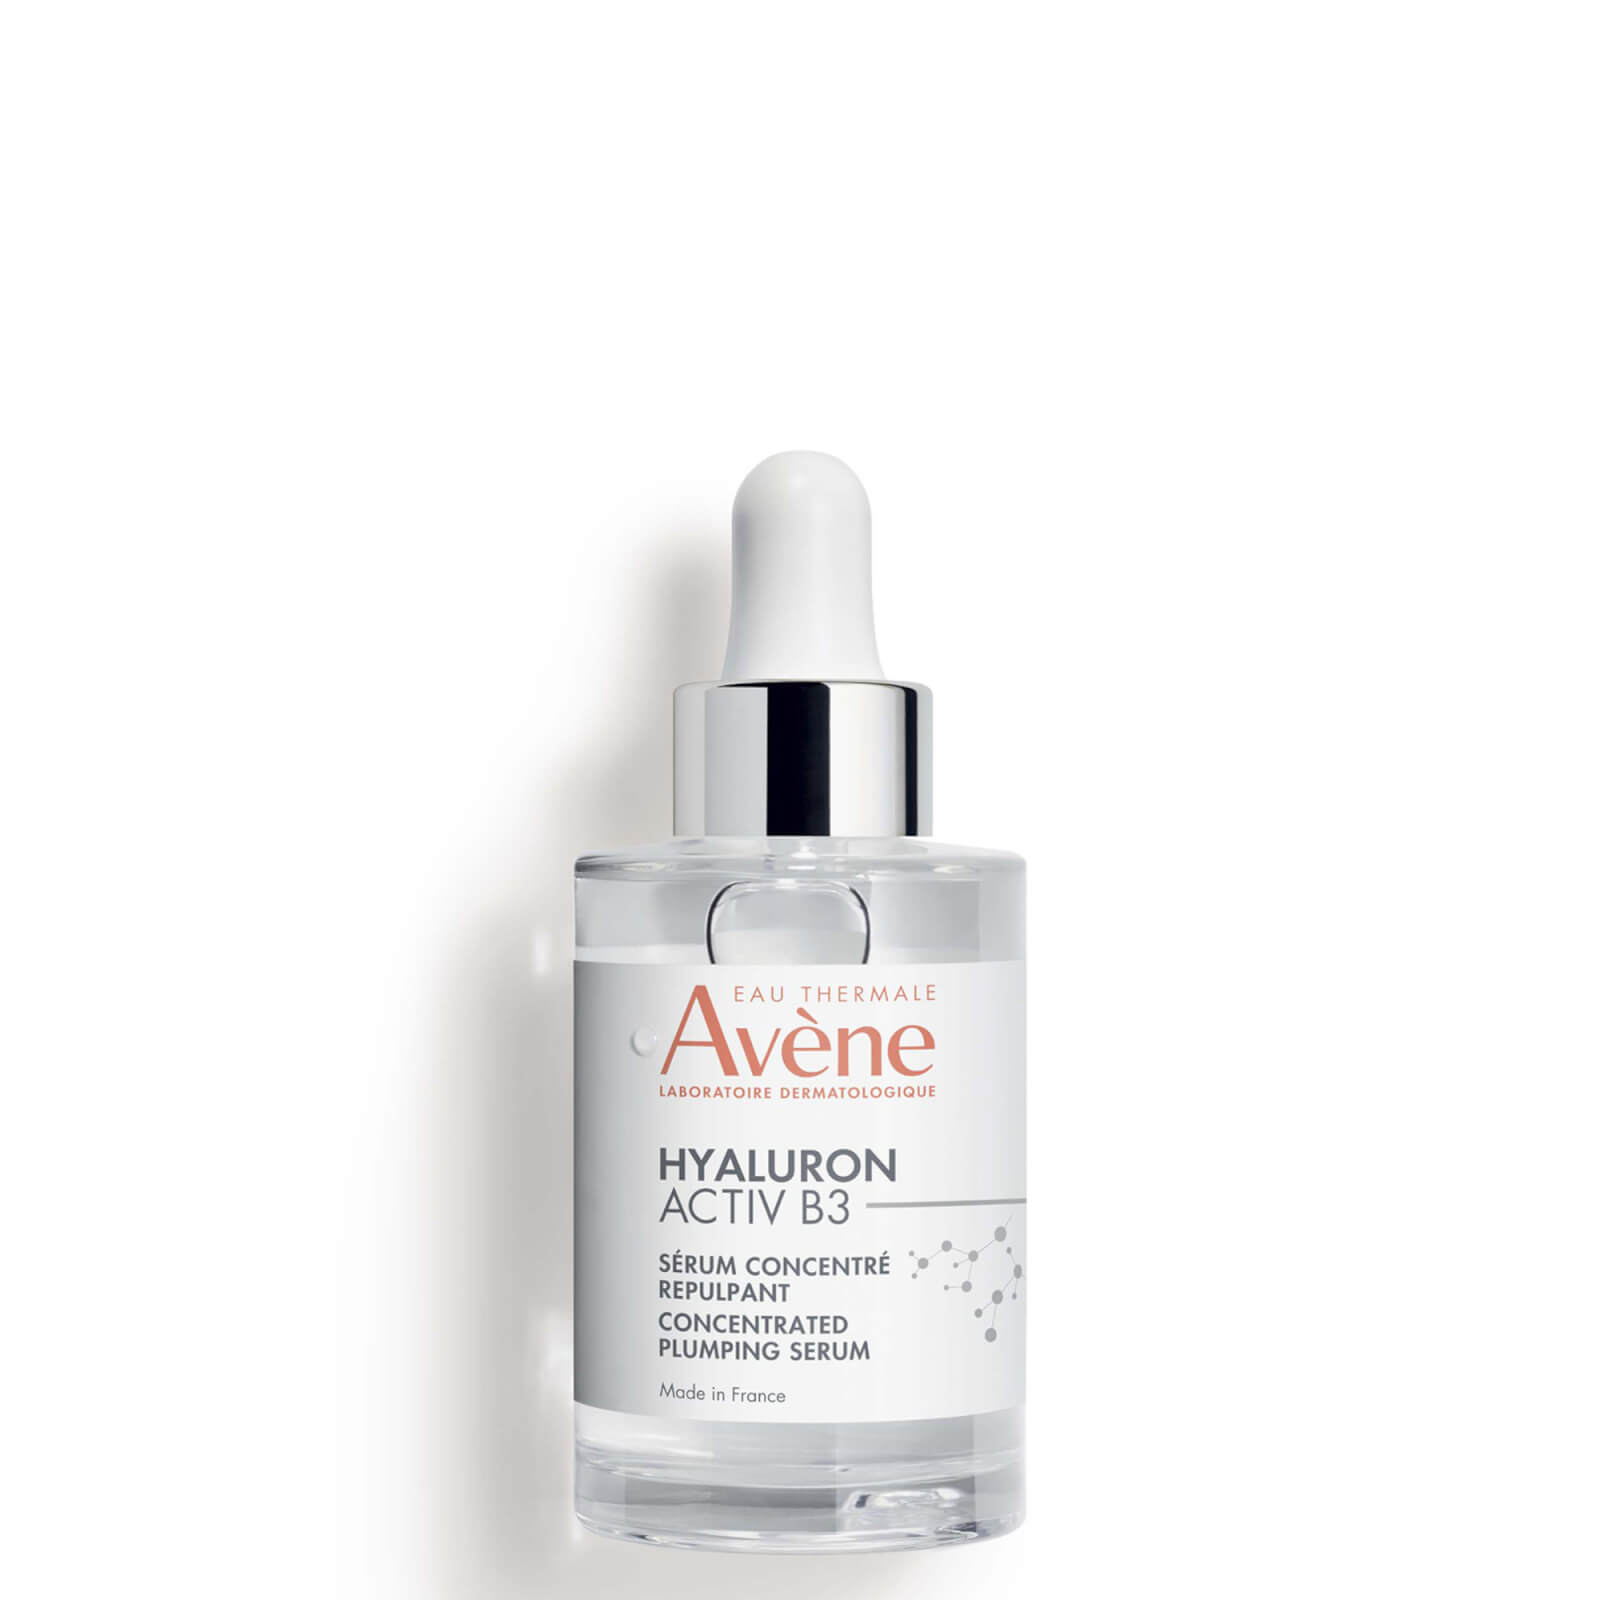 Avene Avène Hyaluron Activ B3 Concentrated Plumping Serum 30ml